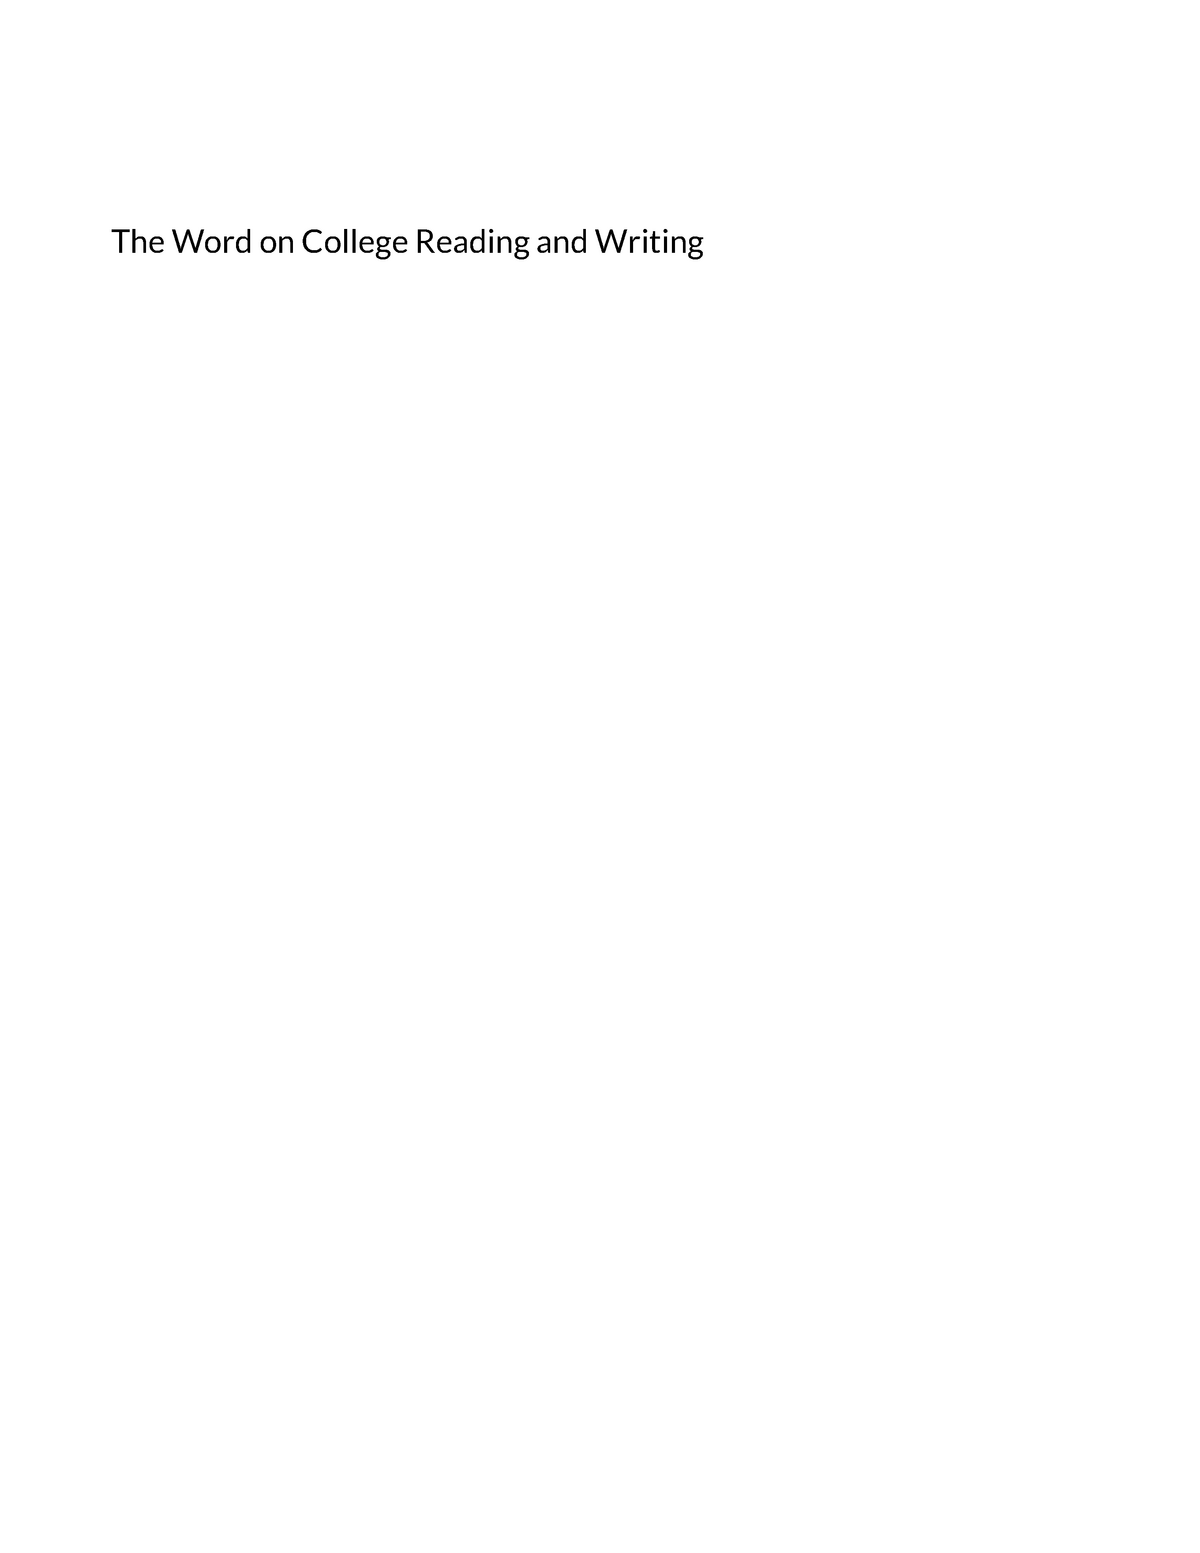 the-word-on-college-reading-and-writing-international-license-except